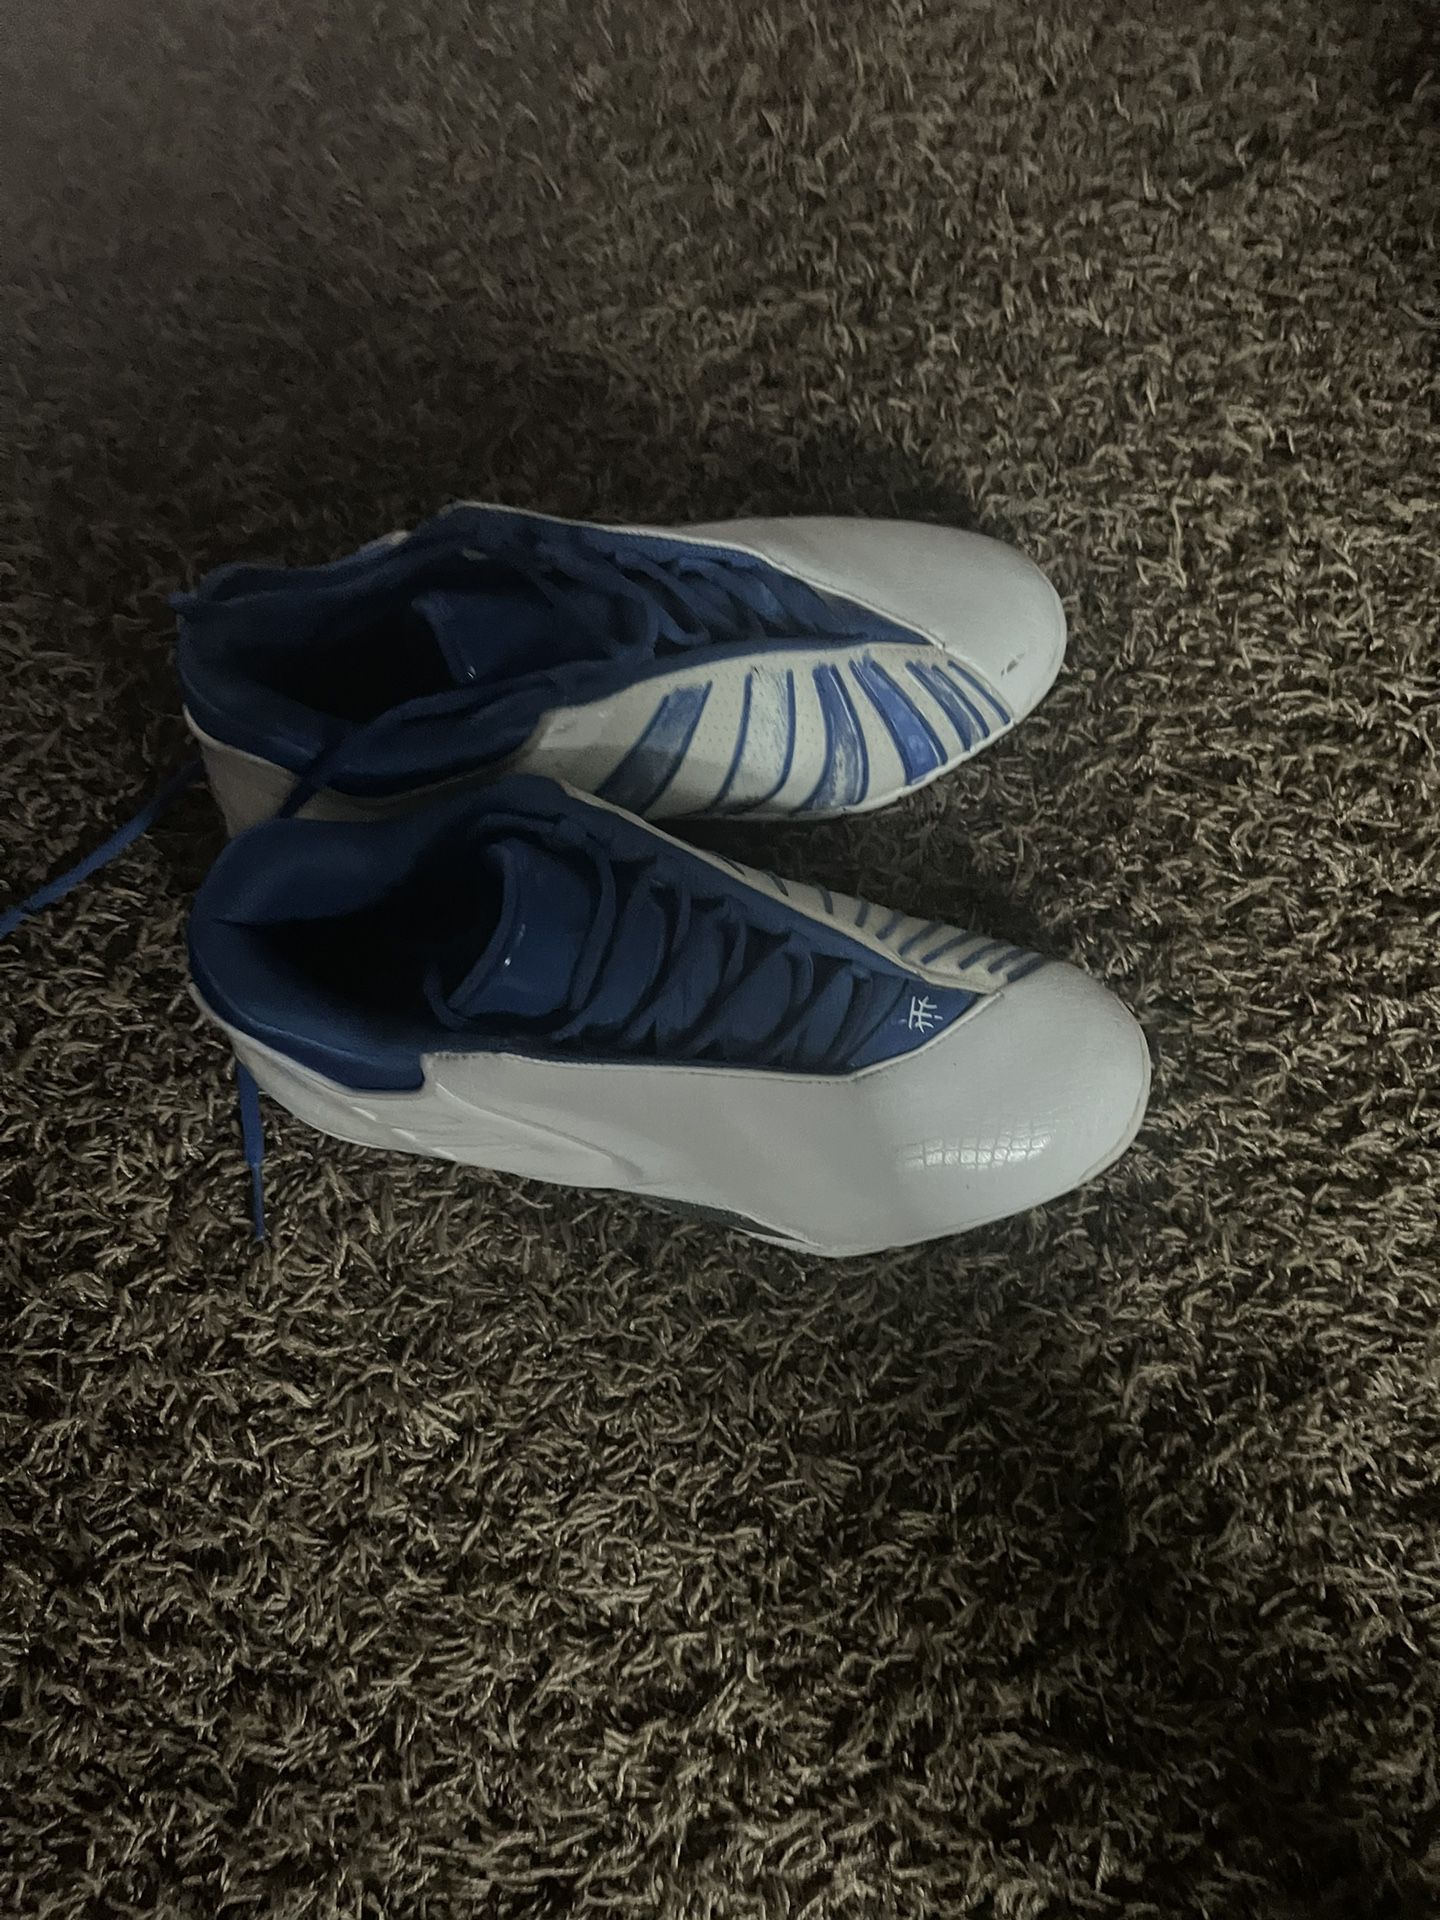 Basketball Shoes Size 10